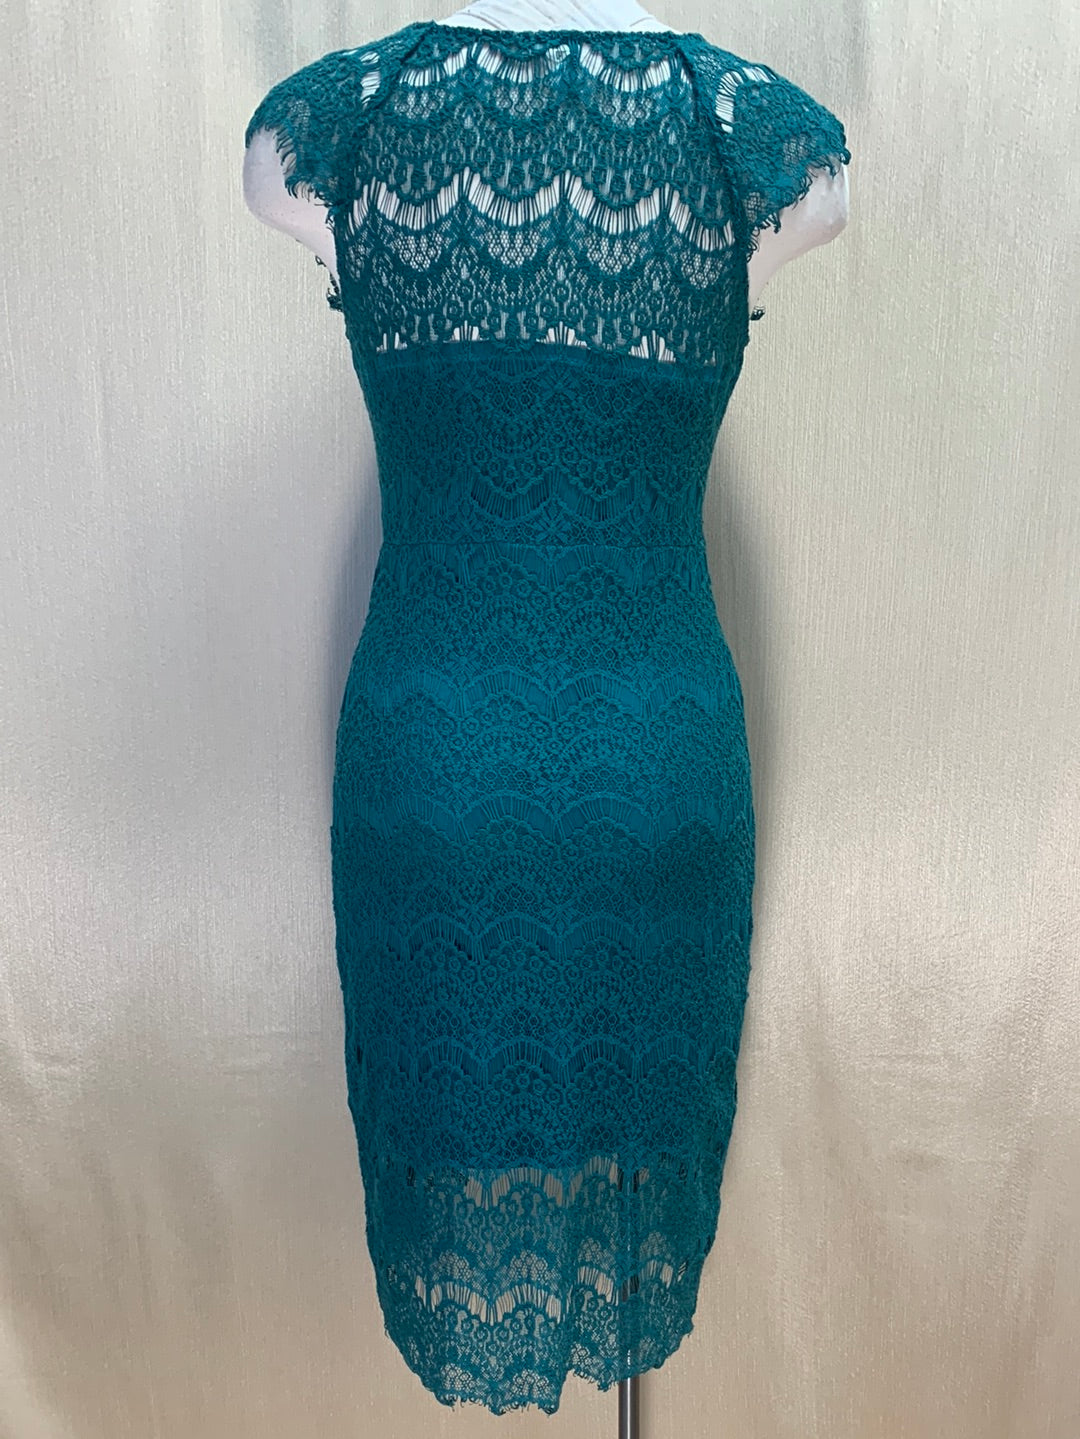 INTIMATELY FREE PEOPLE teal Lace Bodycon Cap Sleeve Slip Dress - L